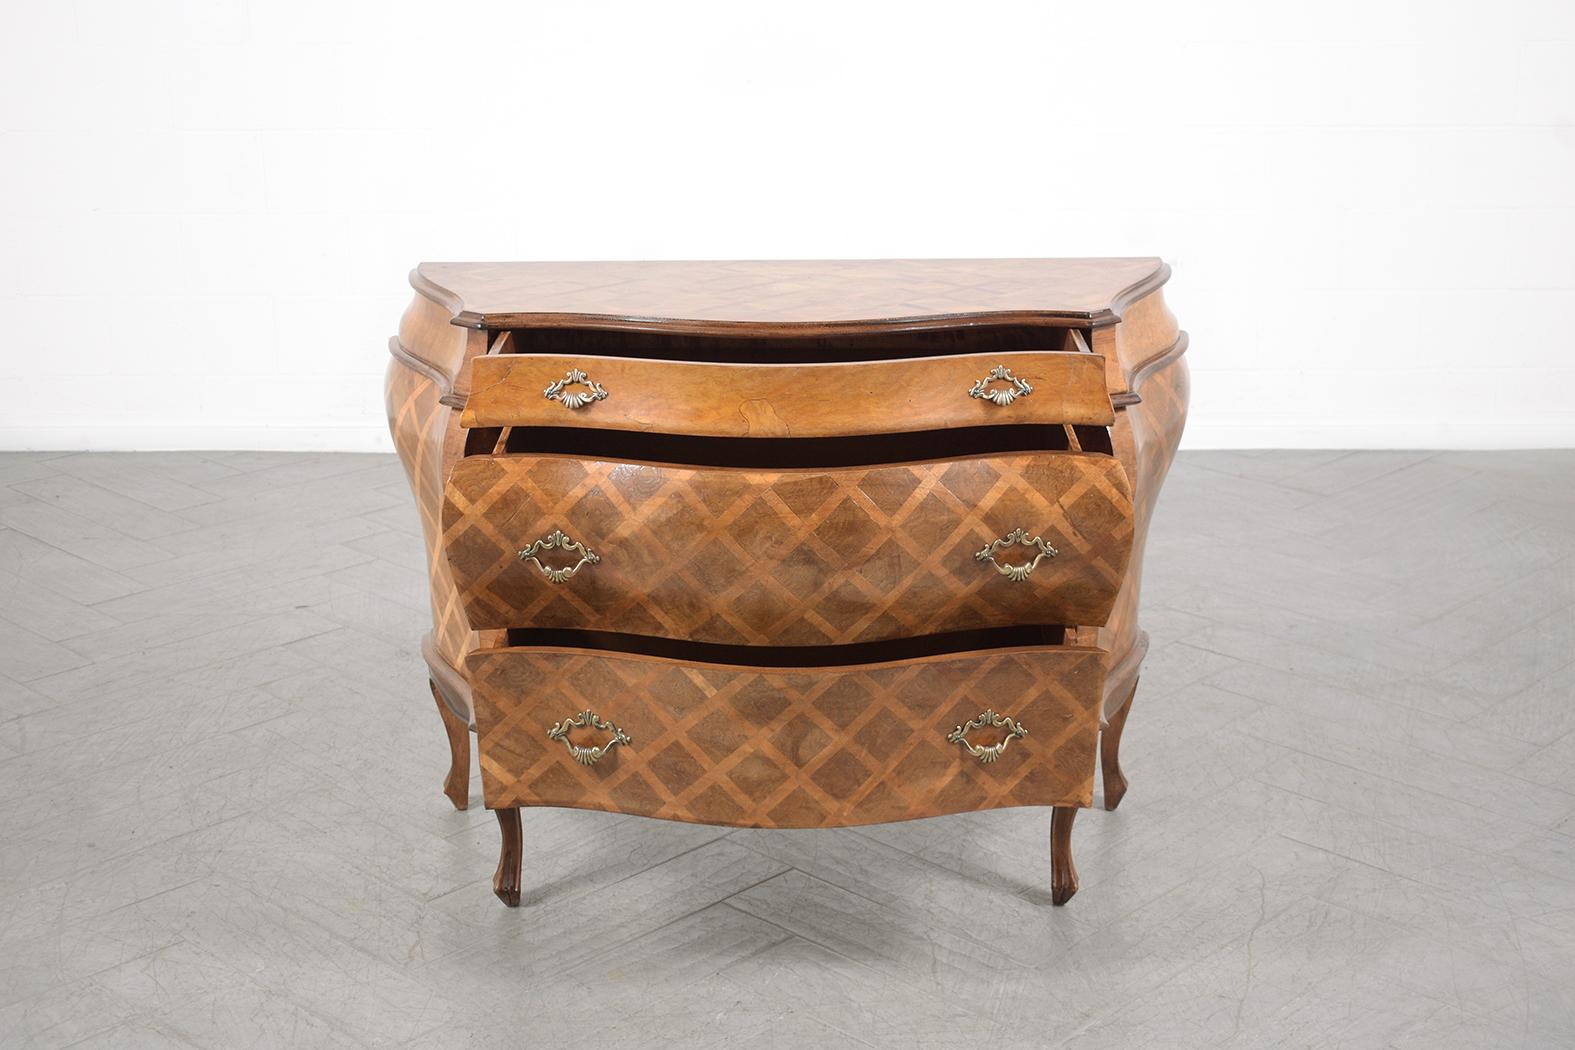 Italian Vintage Commode: Restored Wood and Marquetry Veneer Bombay Chest 2